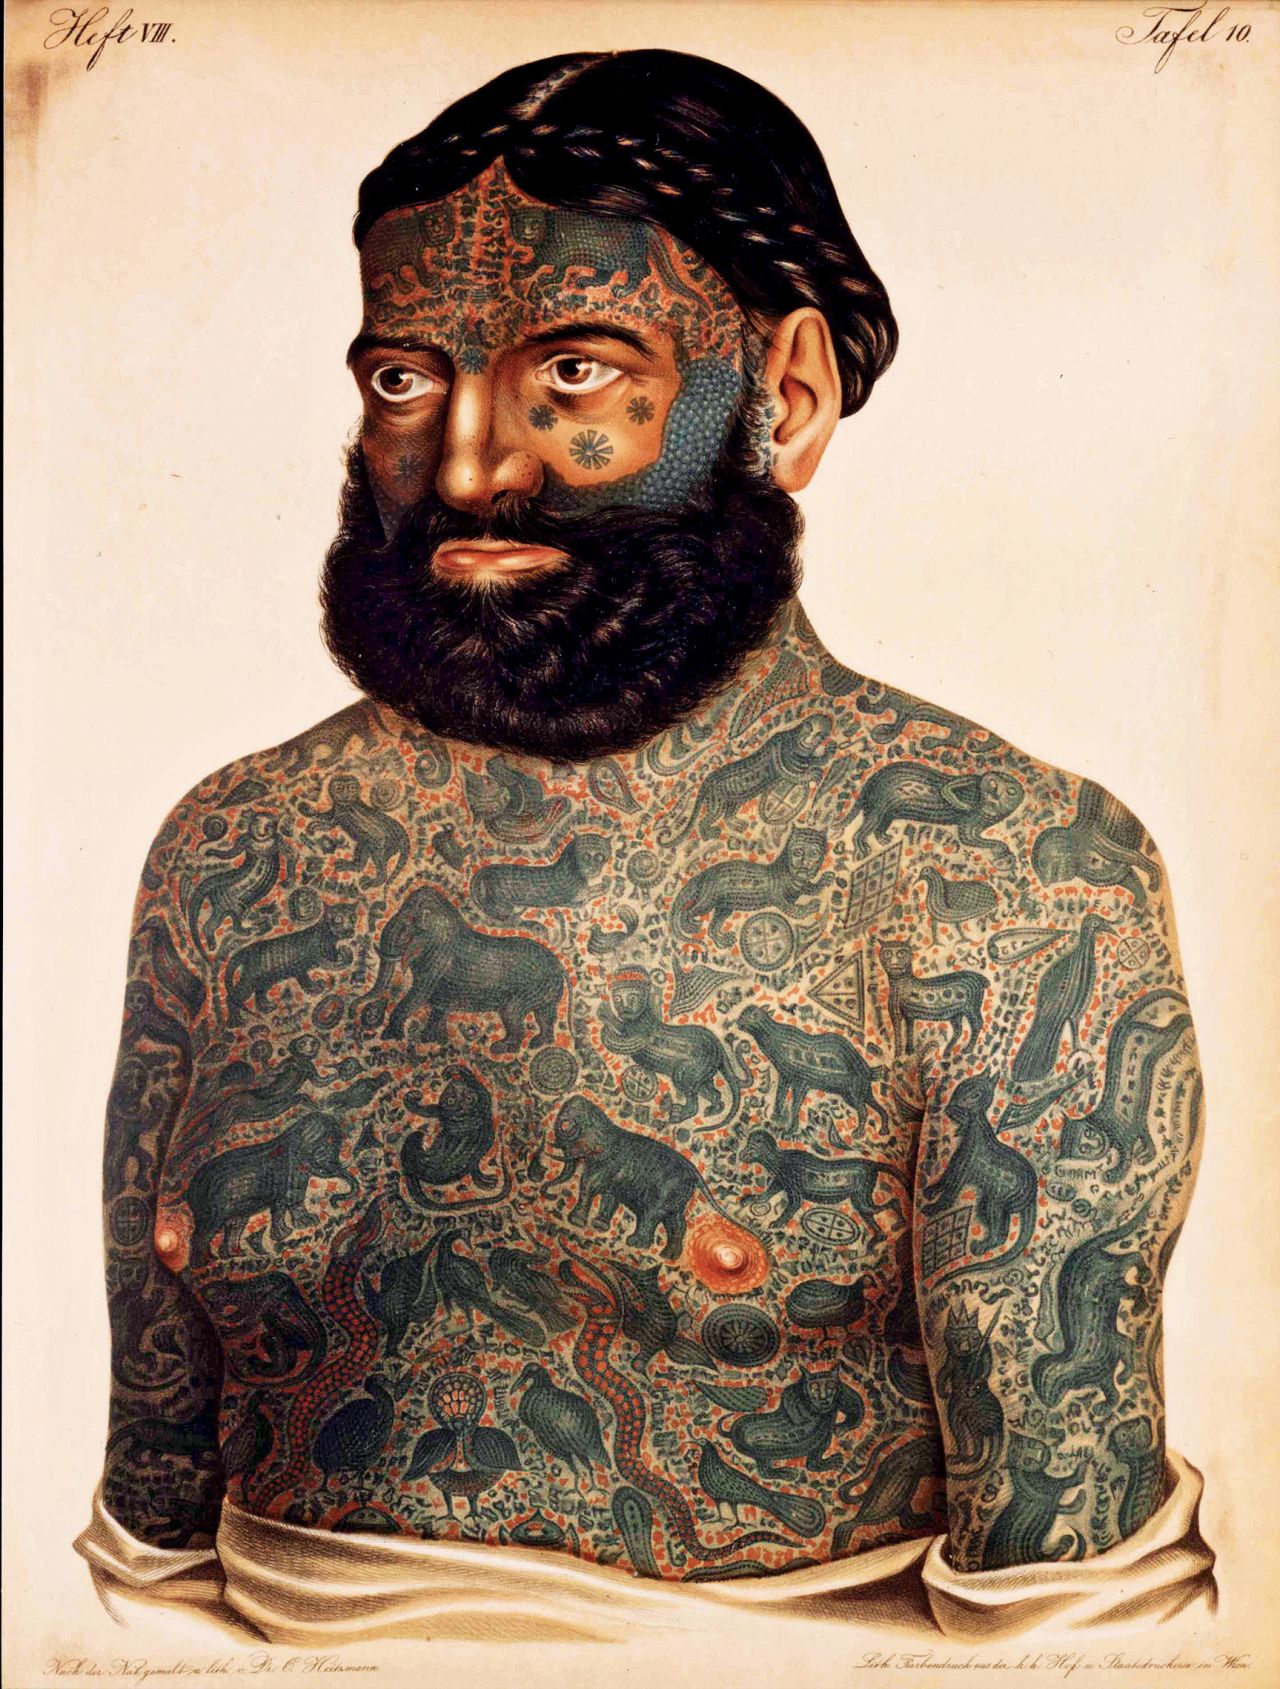 Tattoos have never been more popular, and part of the appeal lies in the rich variety of body-art traditions of the past. This portrait shows a heavily tattooed 19th-century man known as "the Turk." He was an act in Barnum's, a European traveling circus. His tattoos were in the Burmese style, and he was said to have been kidnapped by the "barbarians" of Asia and forcibly tattooed.